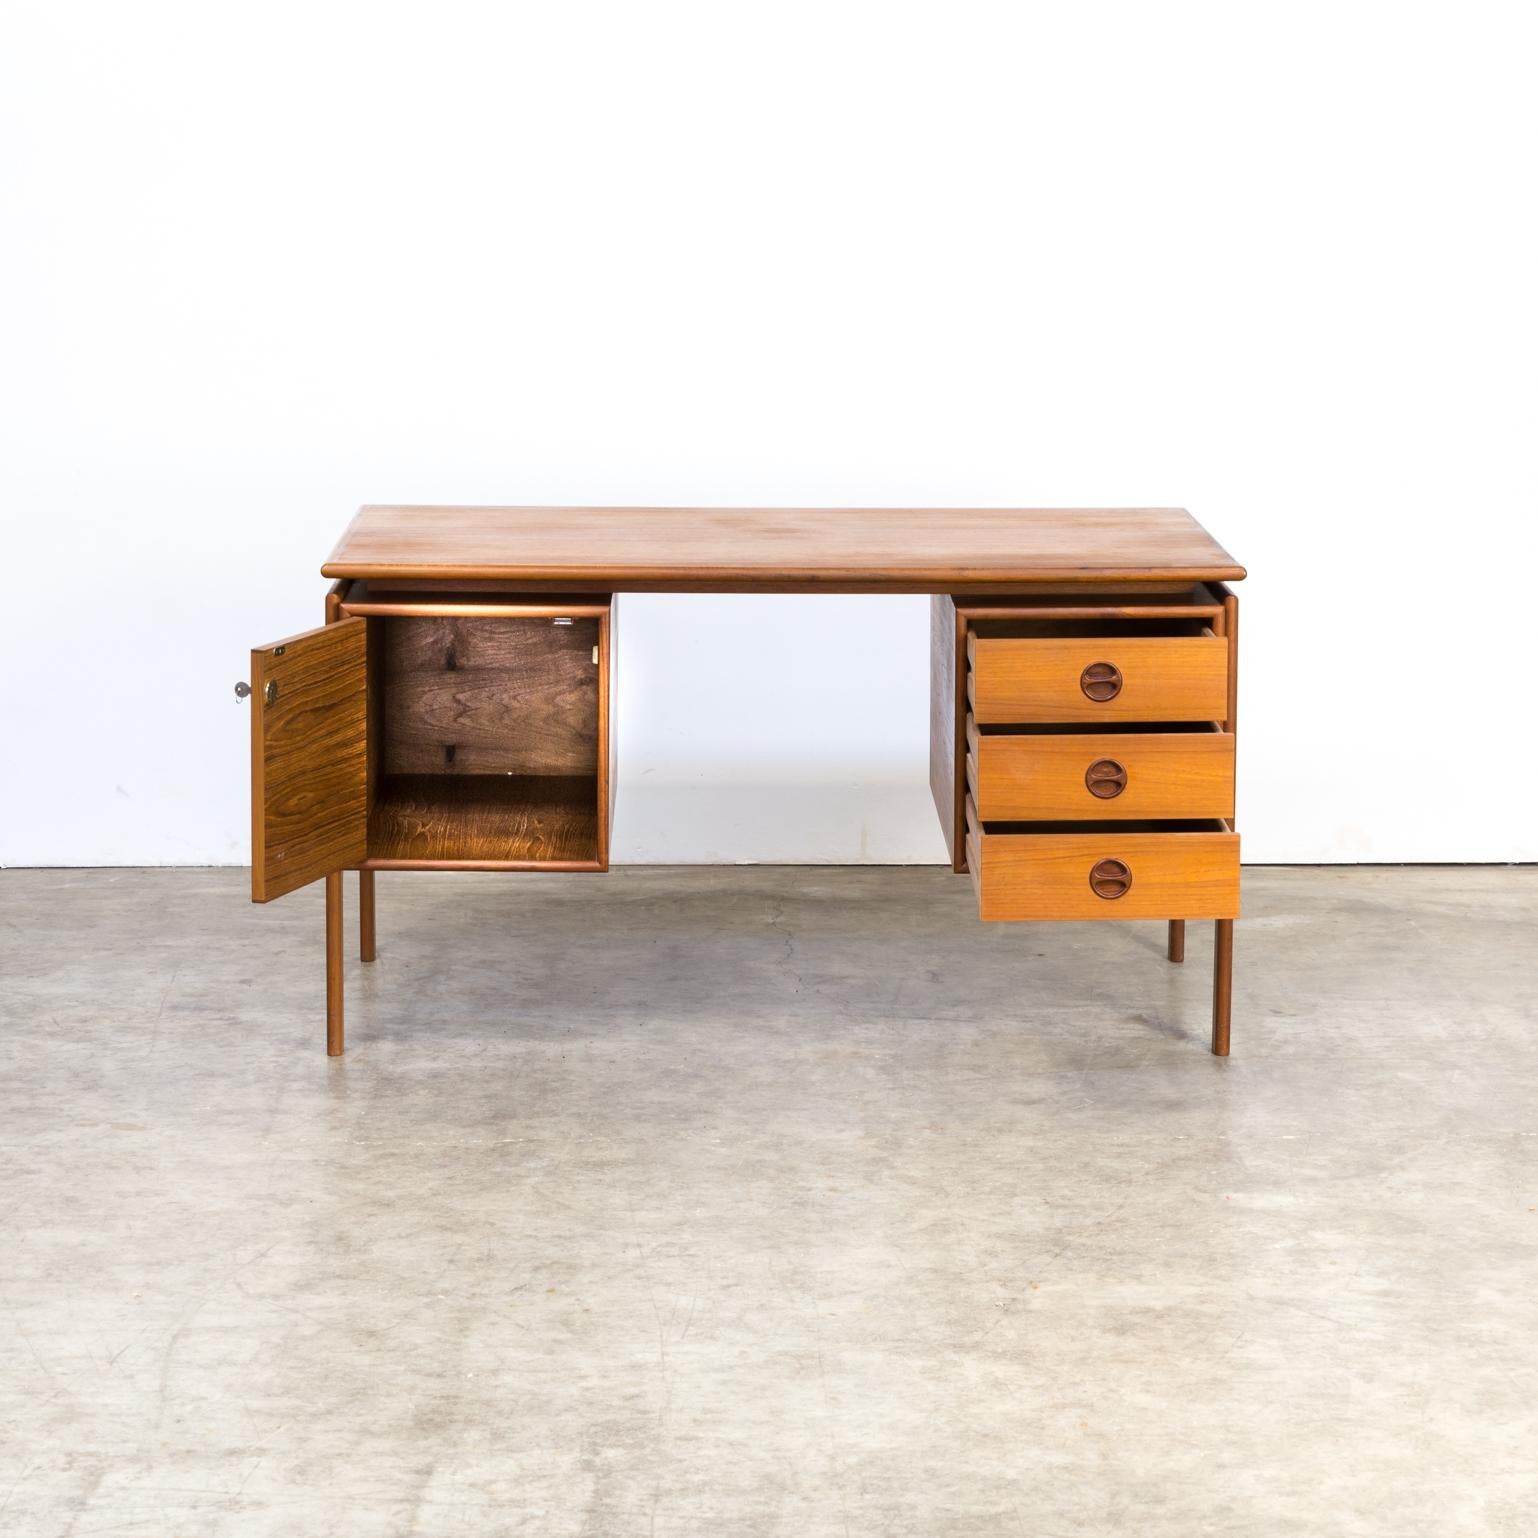 1960s Arne Vodder teak writing desk for GV Møbler. Good condition consistent with age and use.